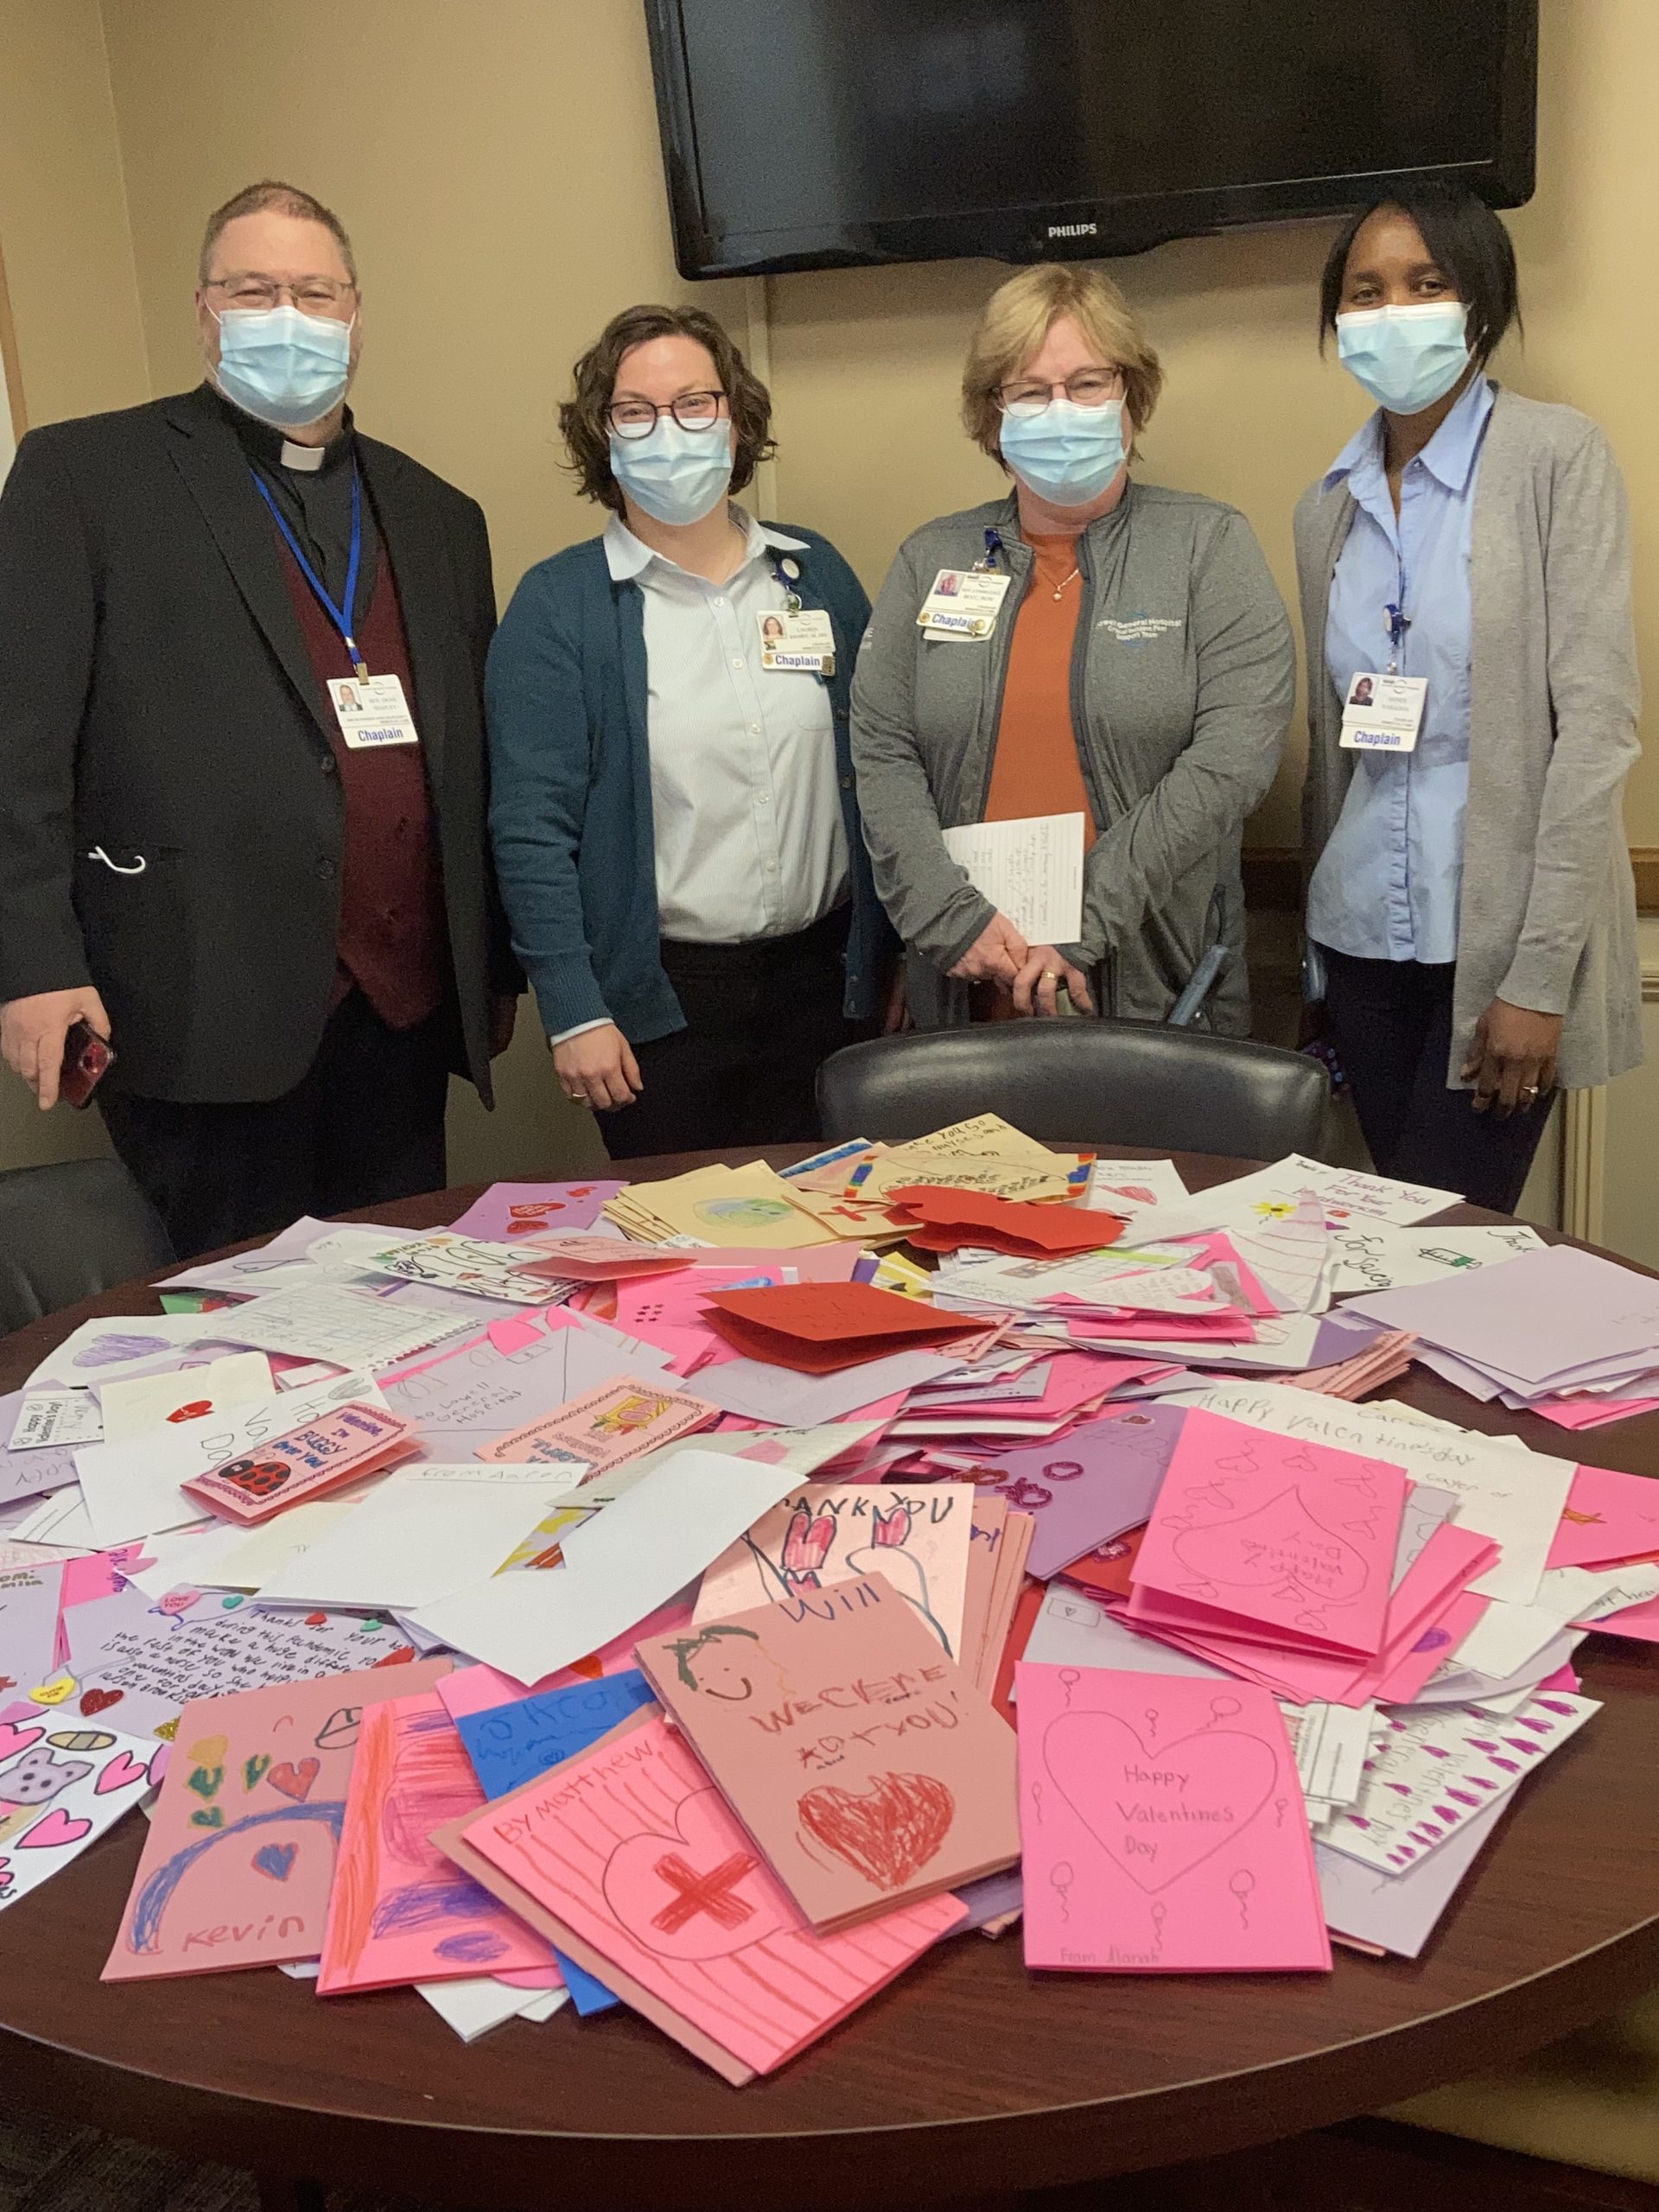 Spiritual Care Dept at Lowell General Hospital receiving the Cards of Appreciation & Love - Left to right: Dean Shapley, Lauren Rigsby, Lynne Cole, Agnes Nabadda